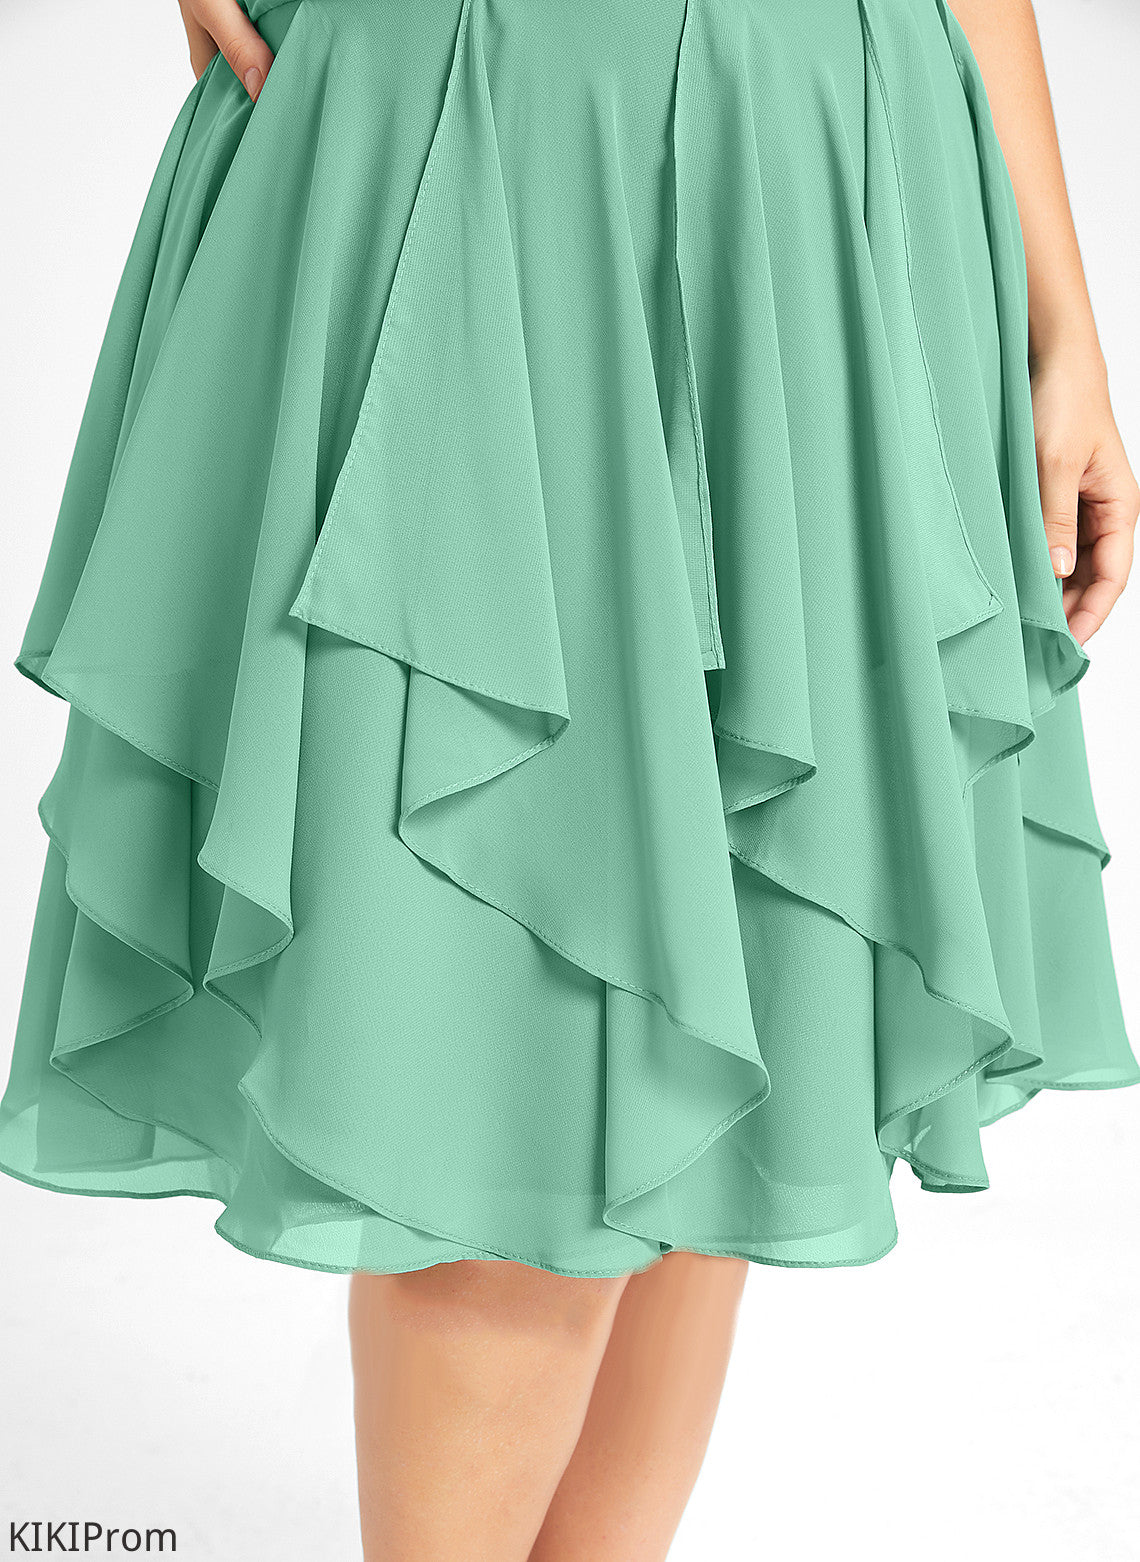 Cocktail Cascading With Scoop Ruffles Dress Miriam Cocktail Dresses Ruffle A-Line Neck Chiffon Knee-Length